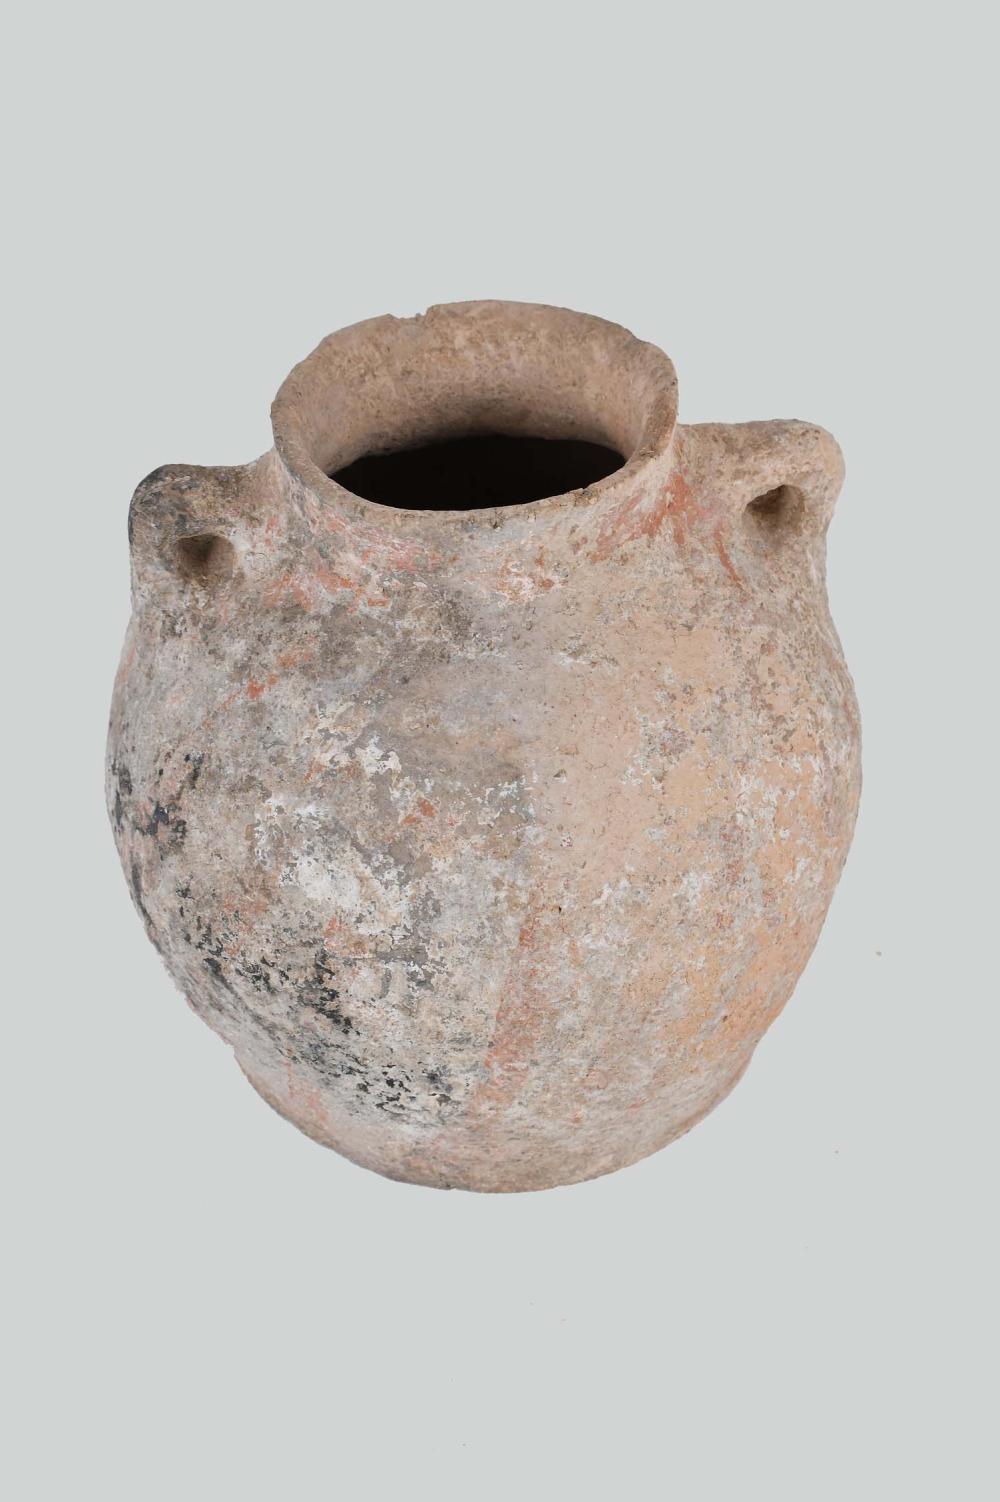 LATE BRONZE AGE TERRA COTTA TWO-HANDLED